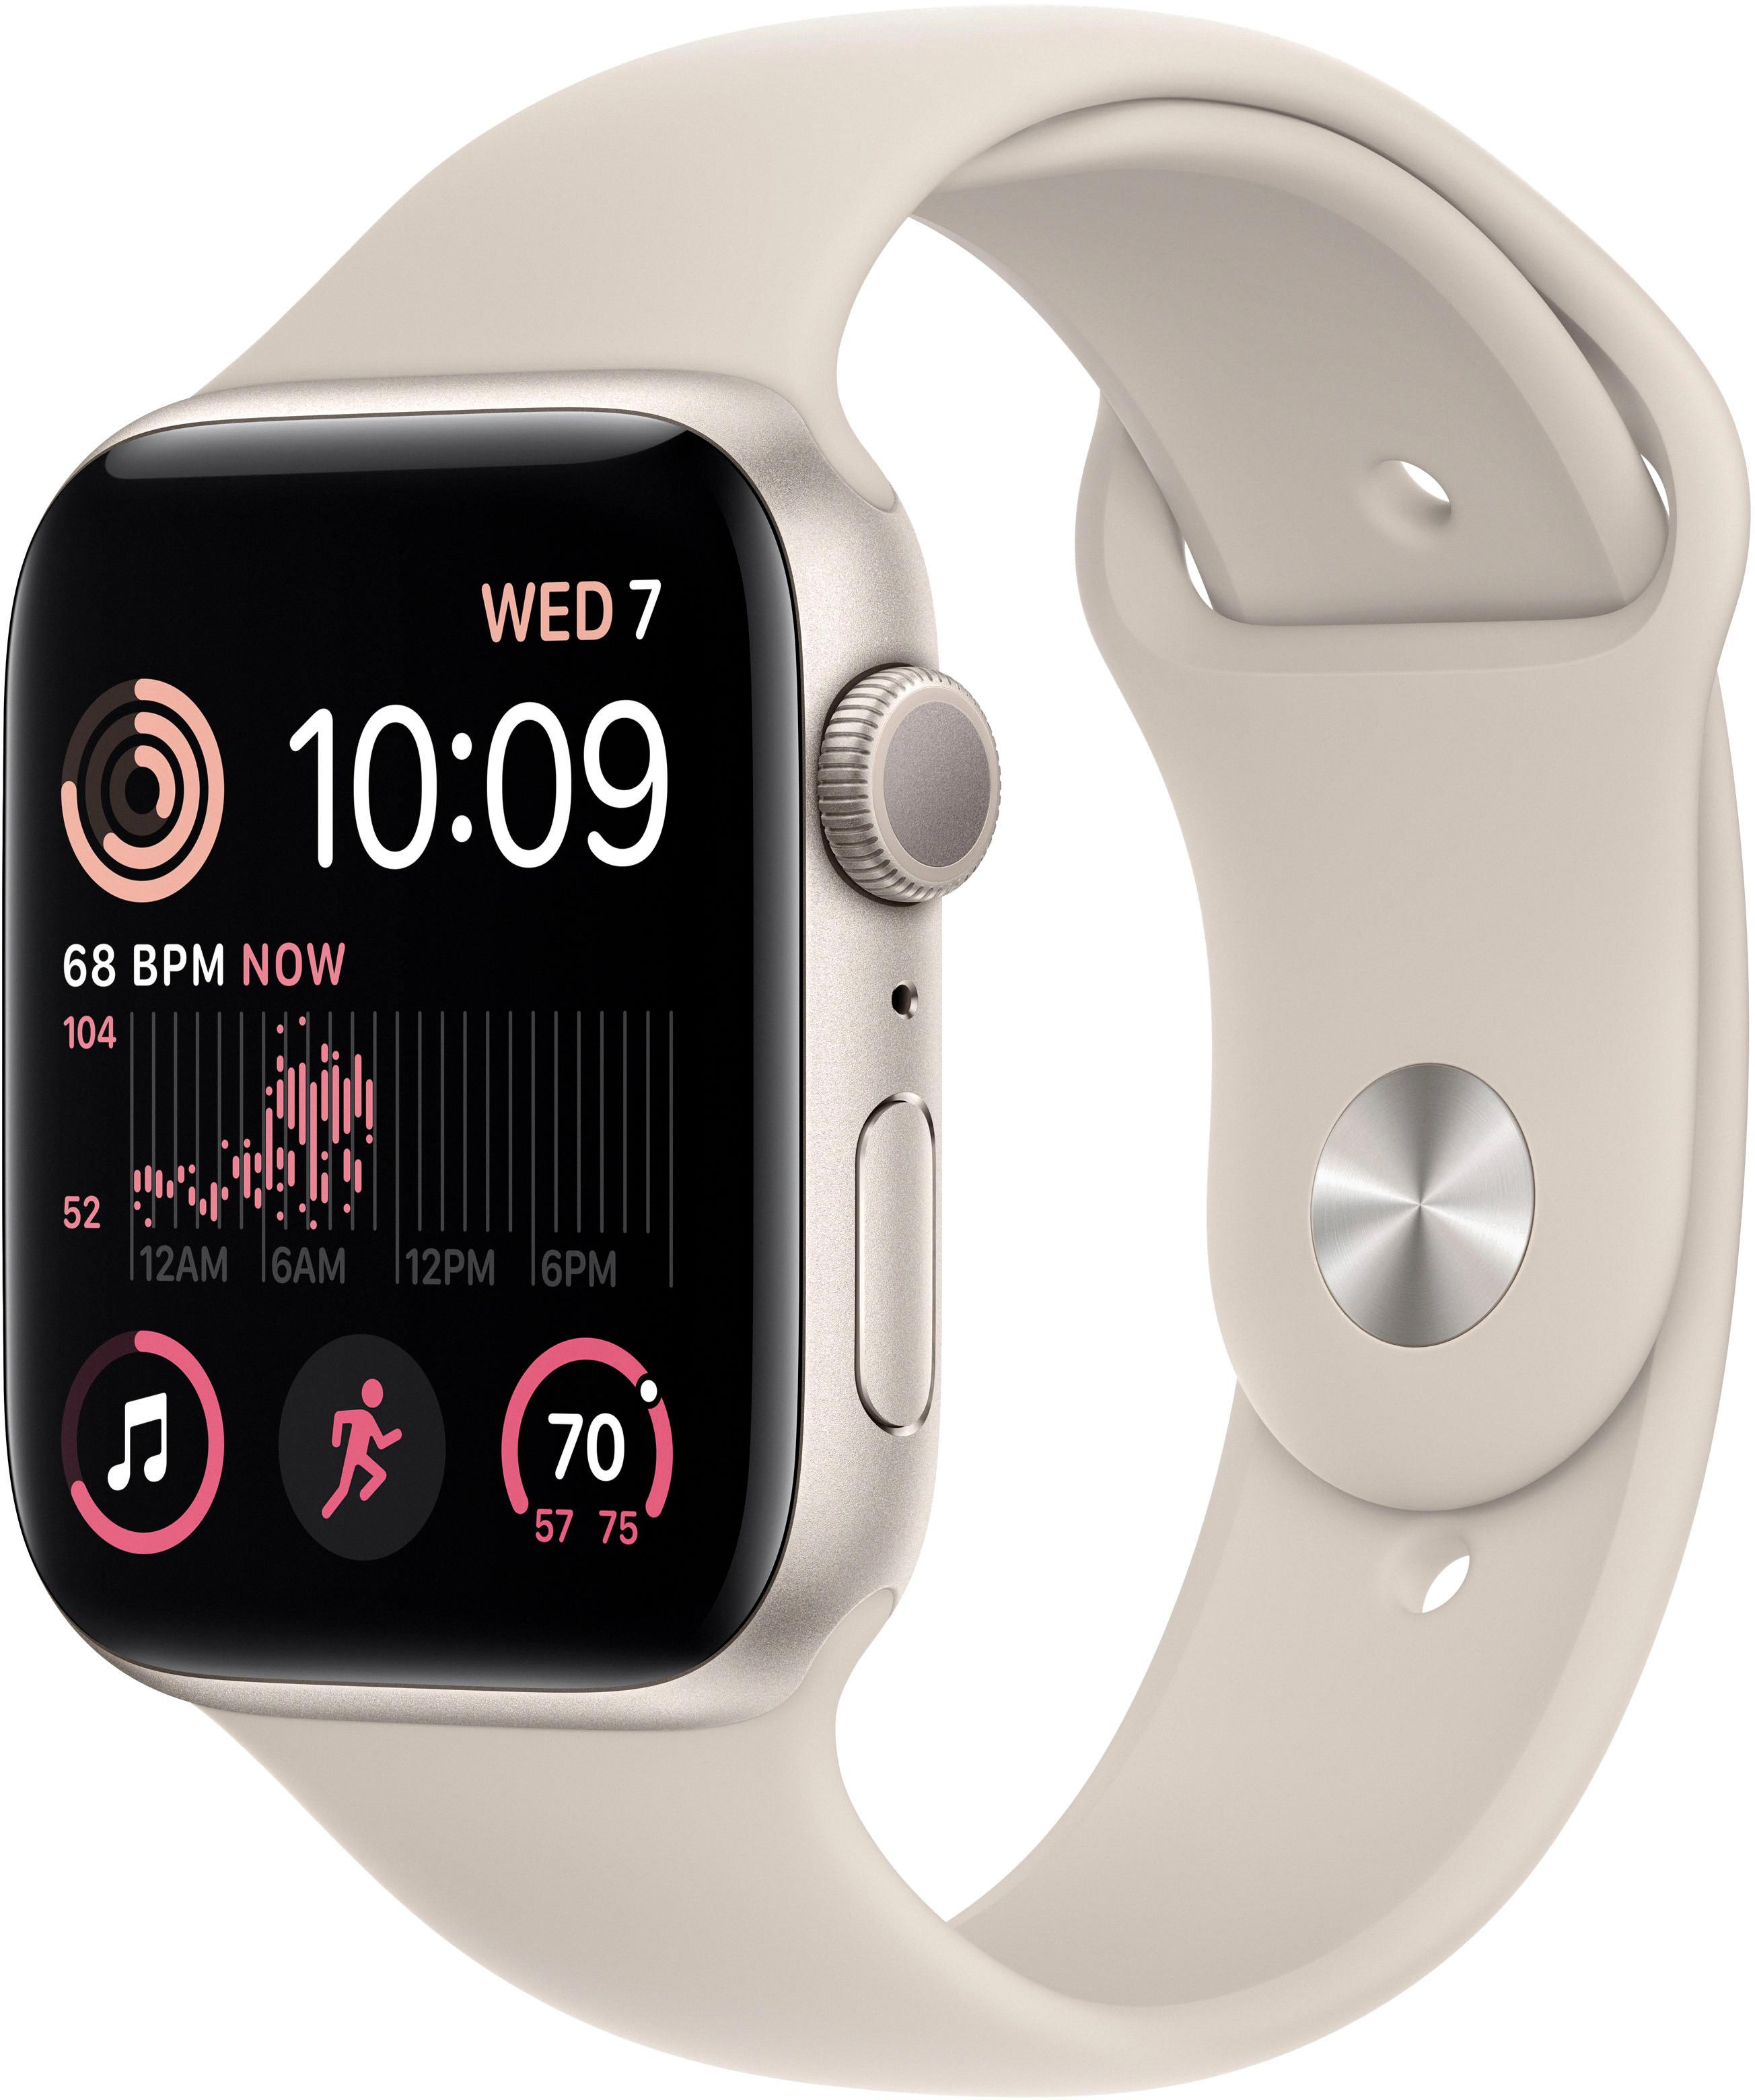 How To Get Your Apple Watch To Vibrate For Calls 1